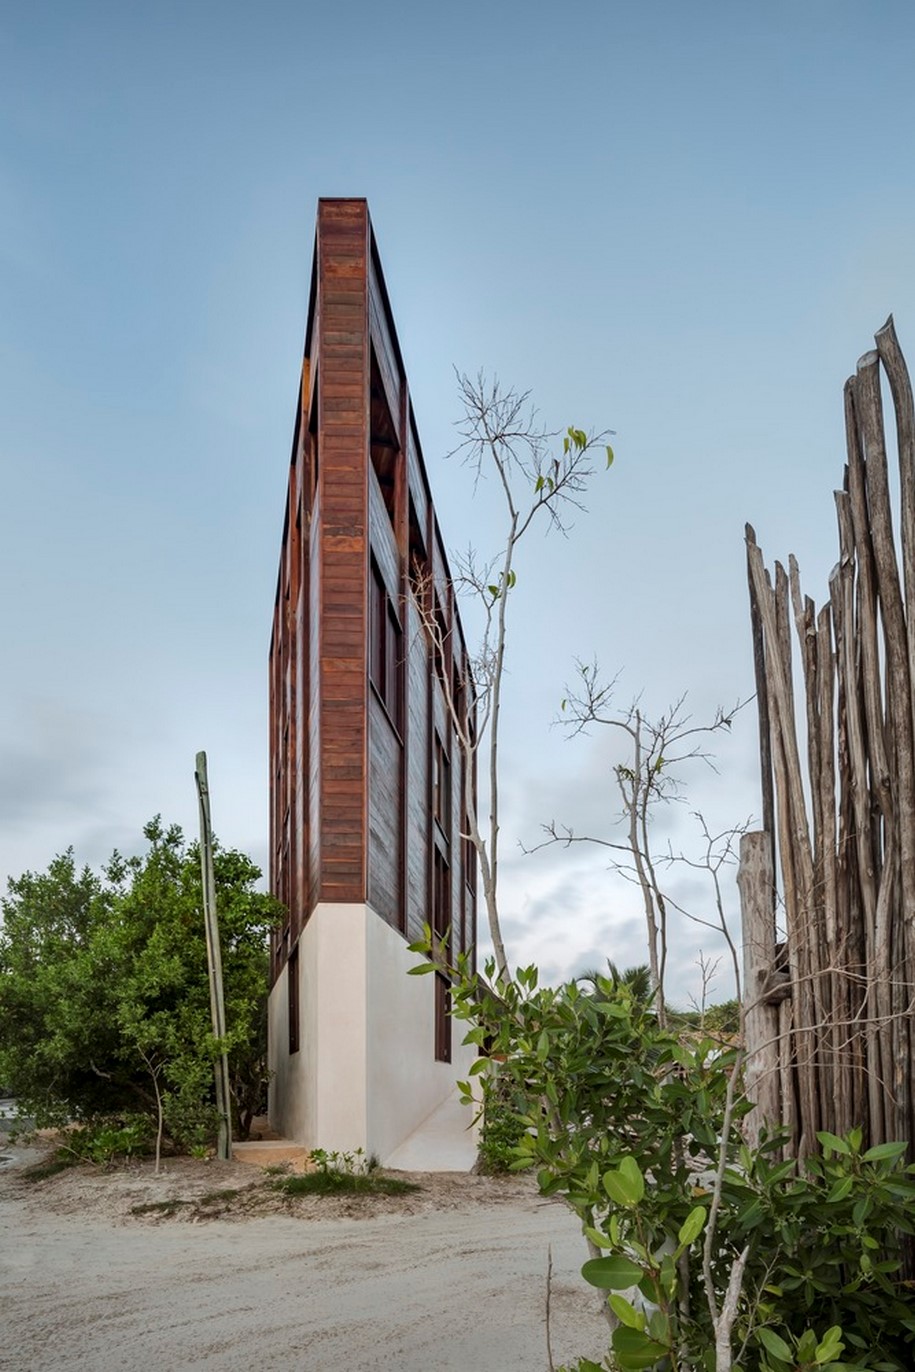 Archisearch PUNTA CALIZA Hotel Holbox by ESTUDIO MACIAS PEREDO takes its cues from the traditional Mayan house